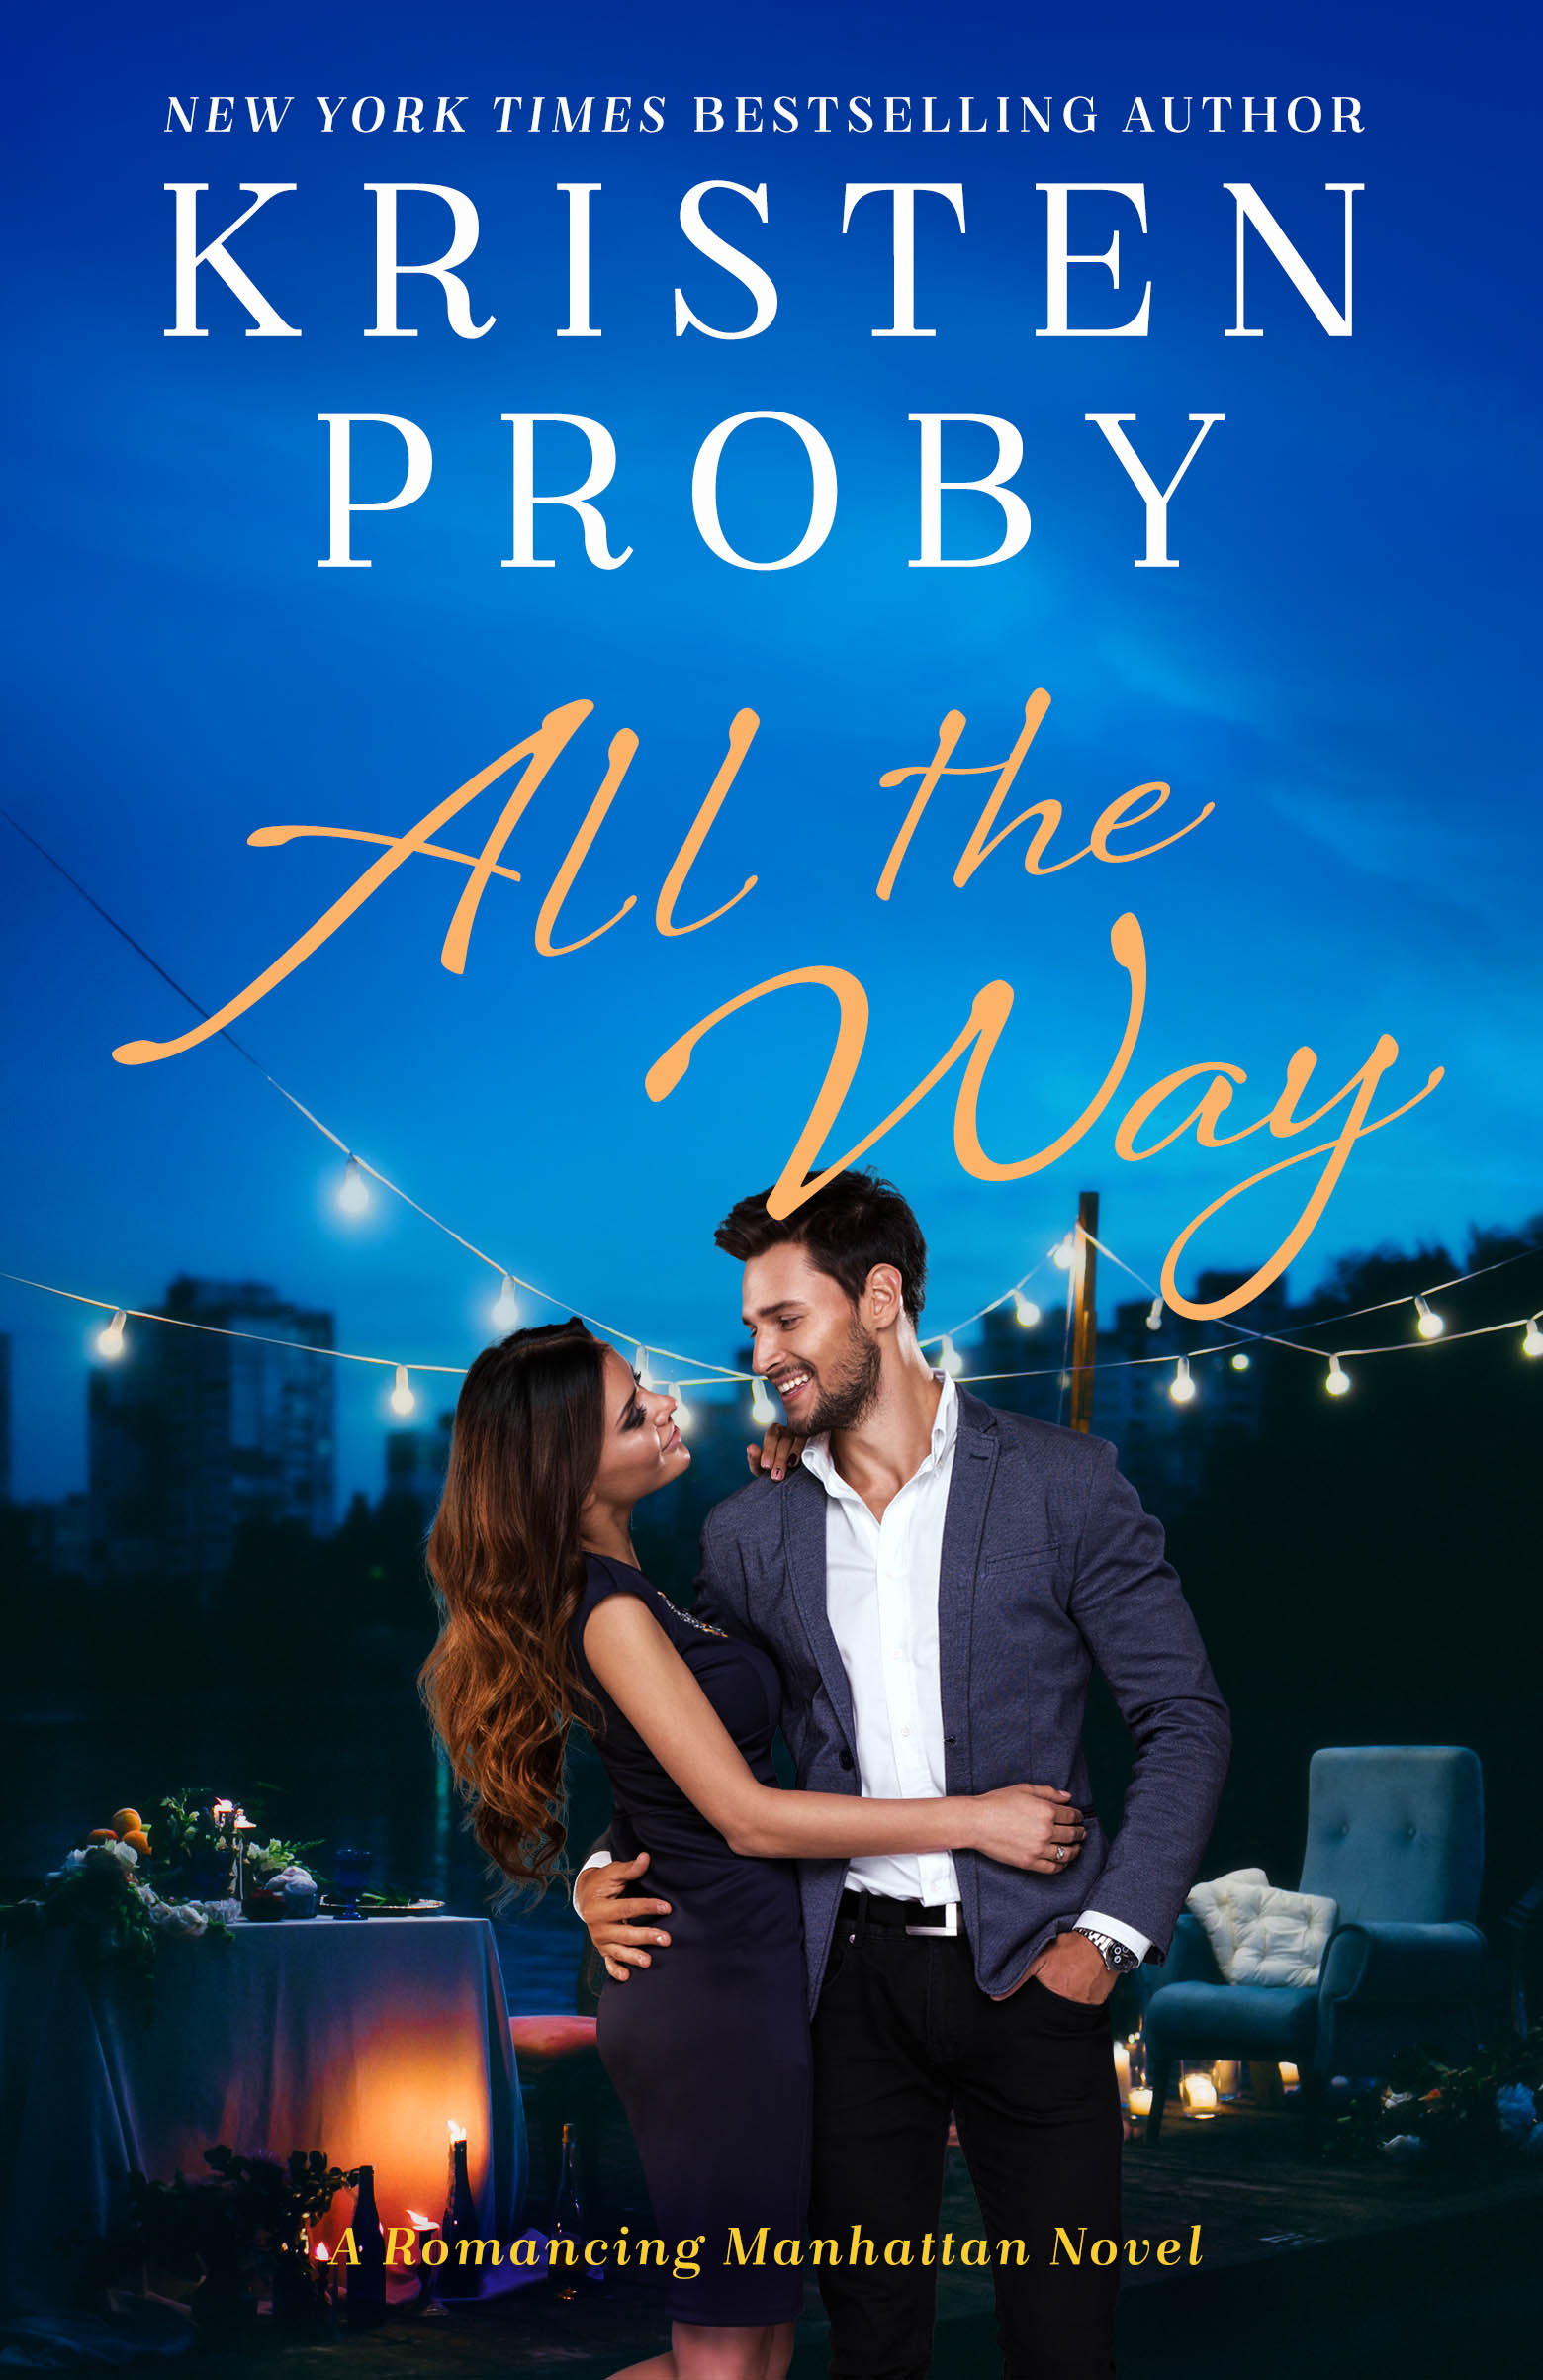 All The Way by Kristen Proby [Release Blitz]